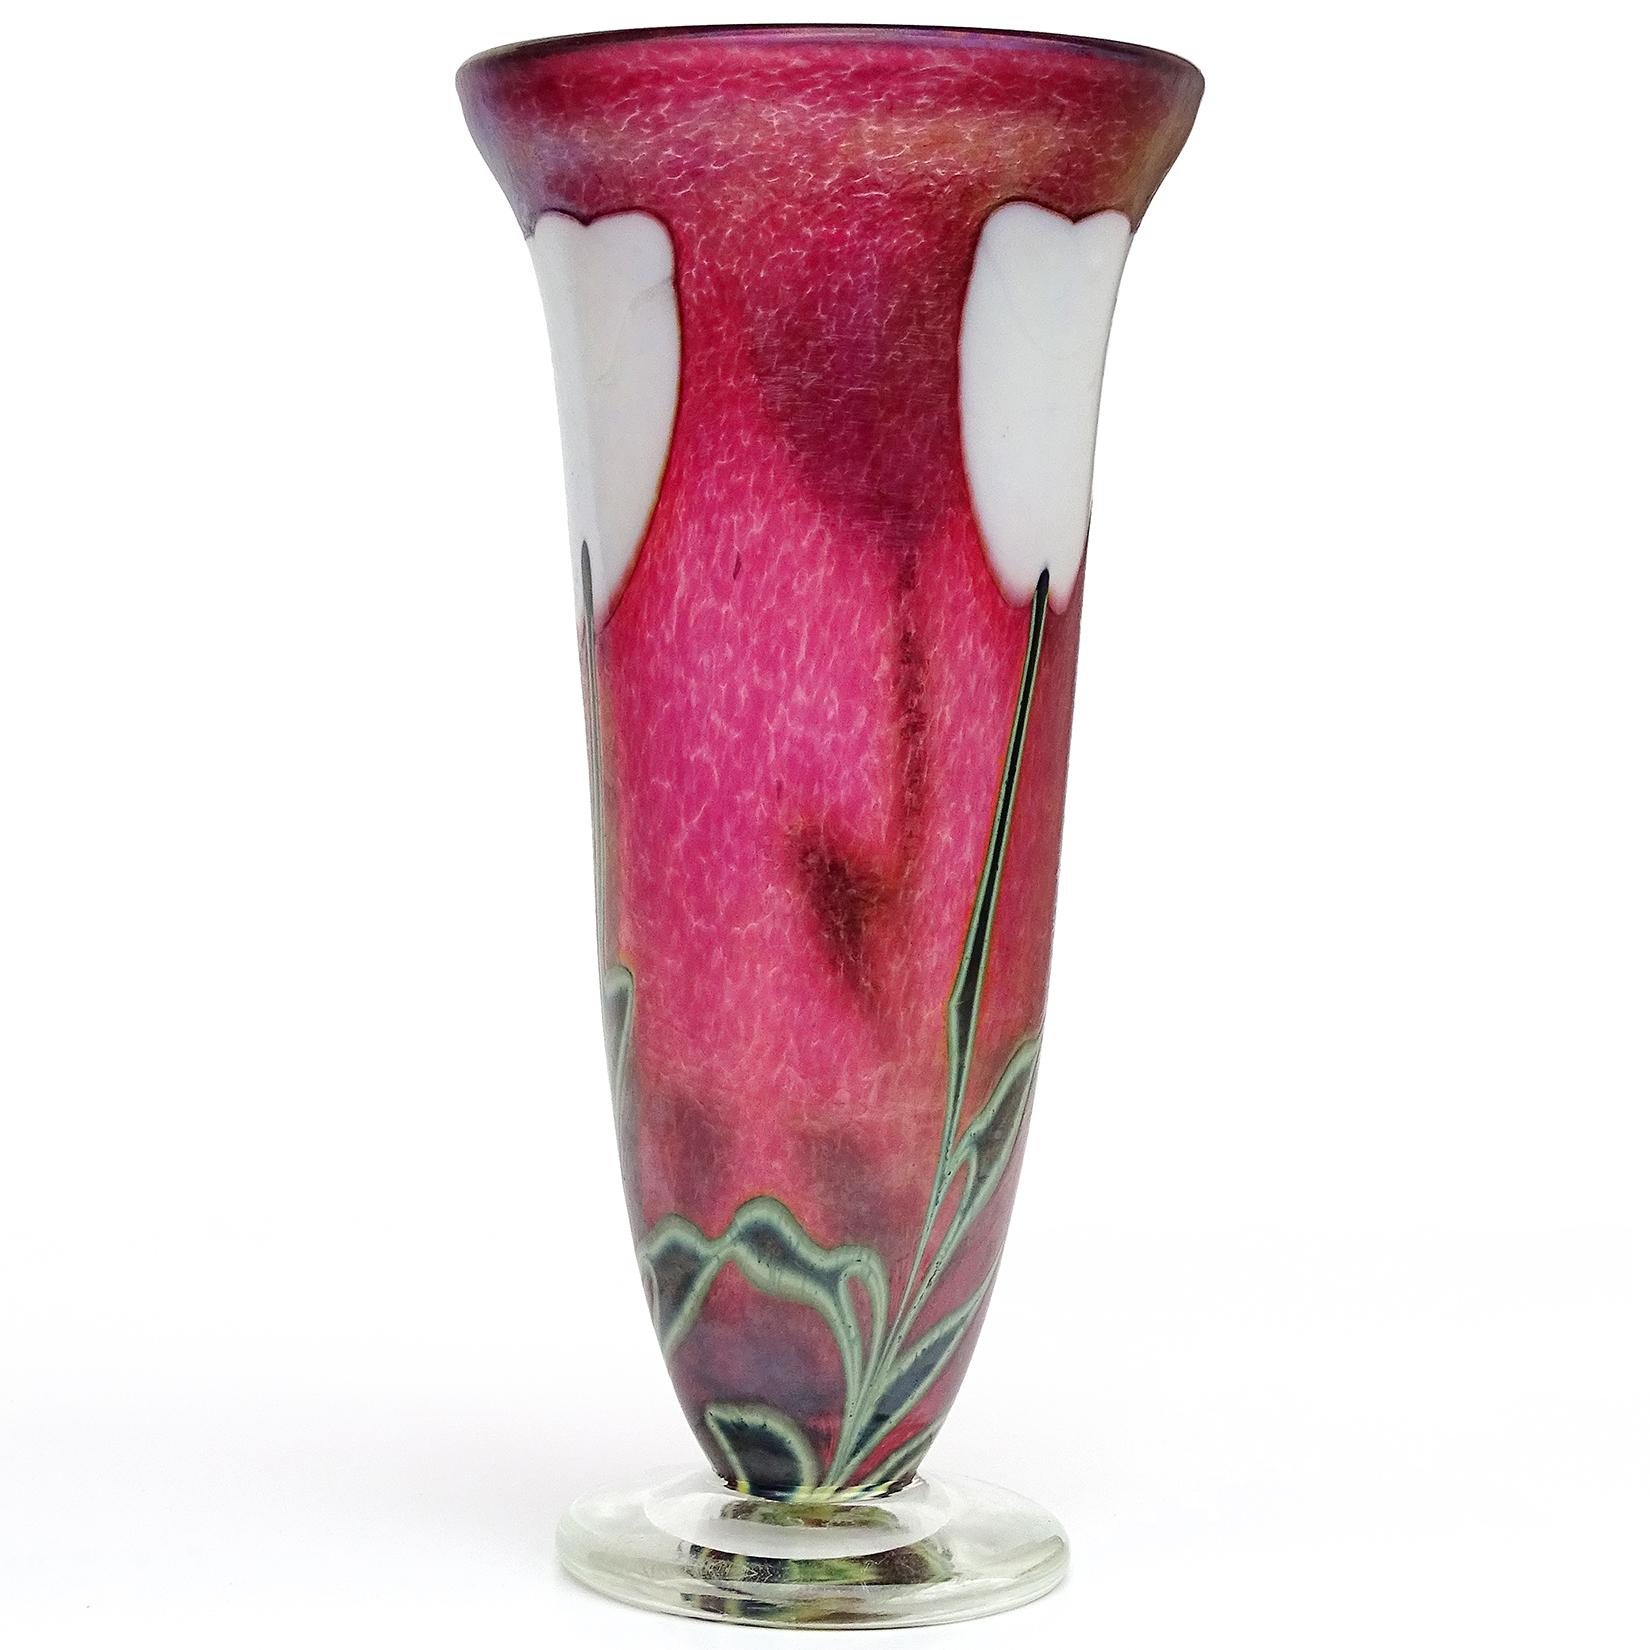 Beautiful vintage hand blown dark pink (almost red) iridescent surface, white tulip flowers, trumpet shaped vase. The vase is documented to designer, and Canadian artist Robert Held. It is signed 